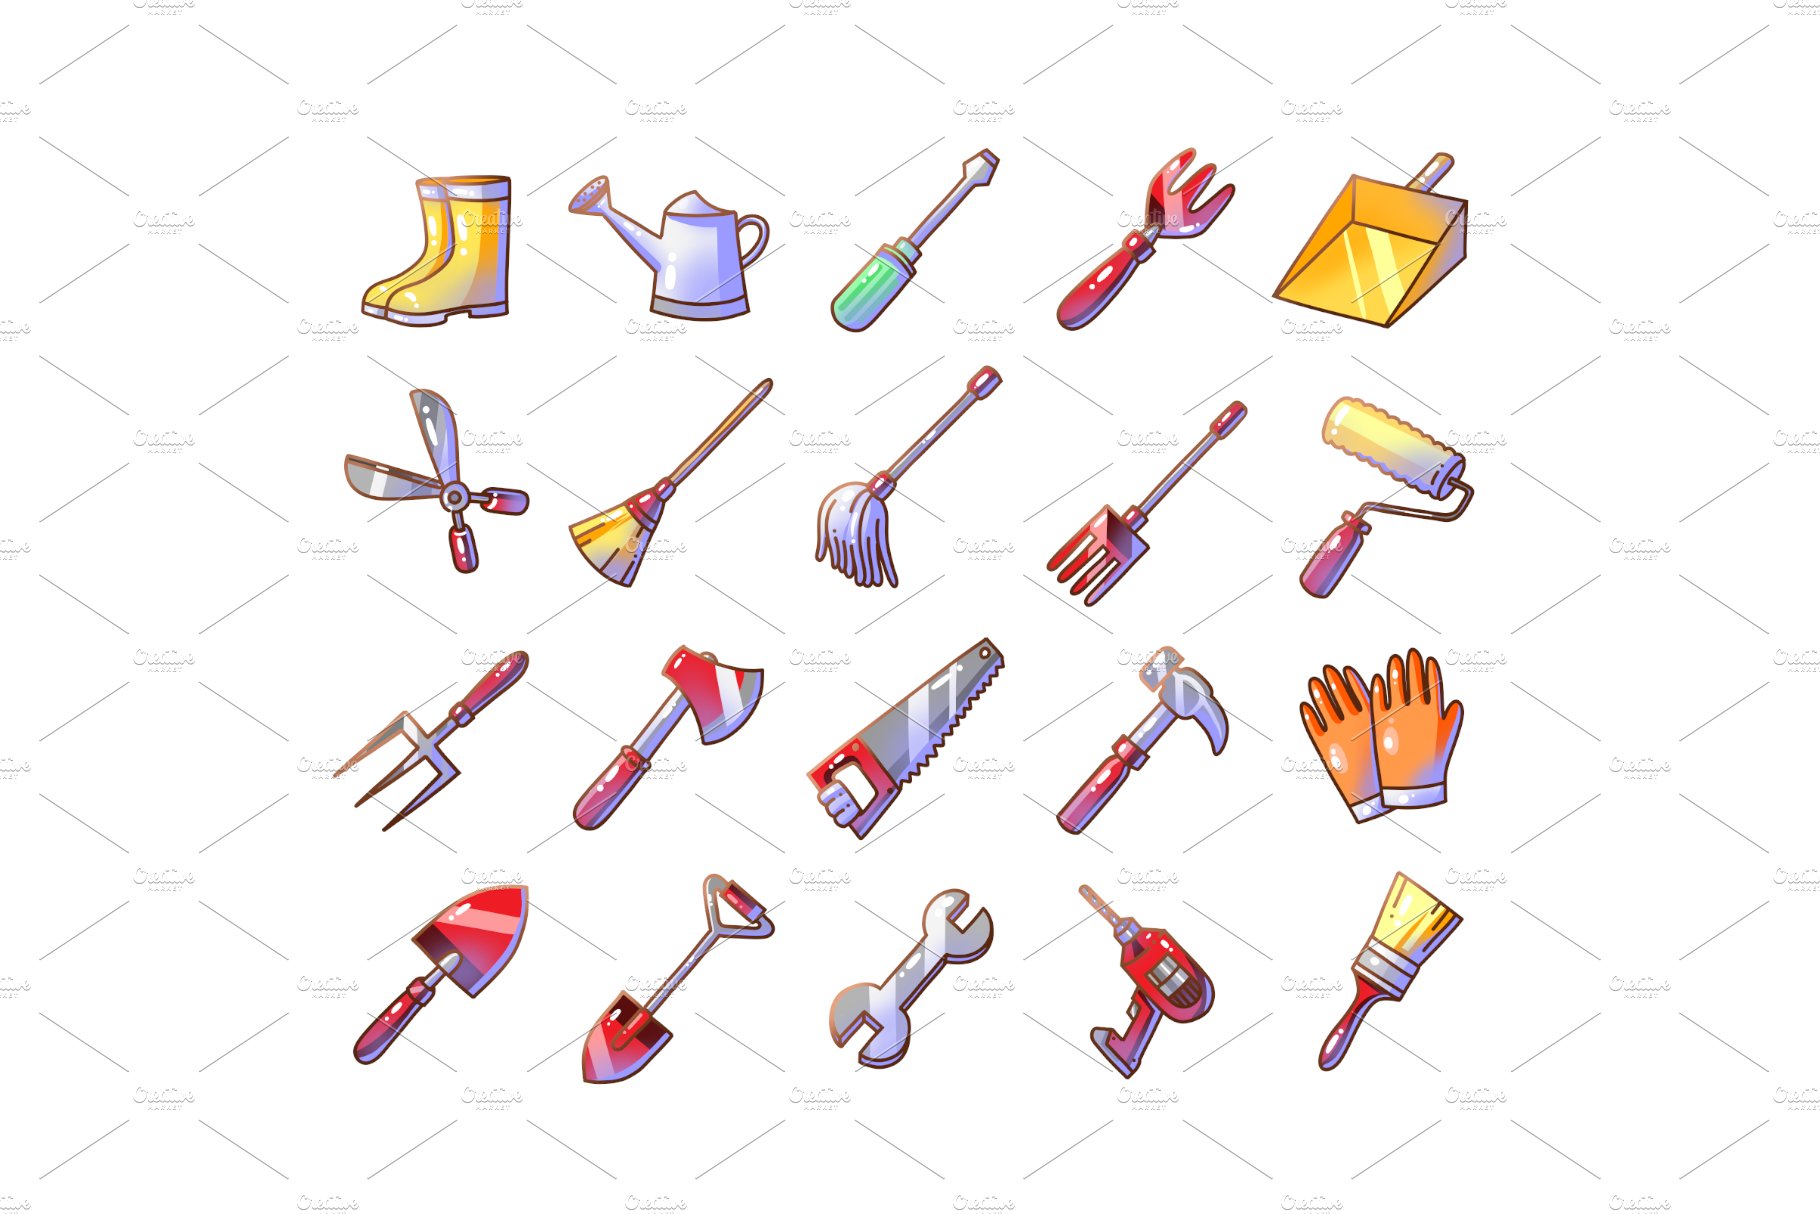 Equipment and Cleaning Tool Clipart. preview image.